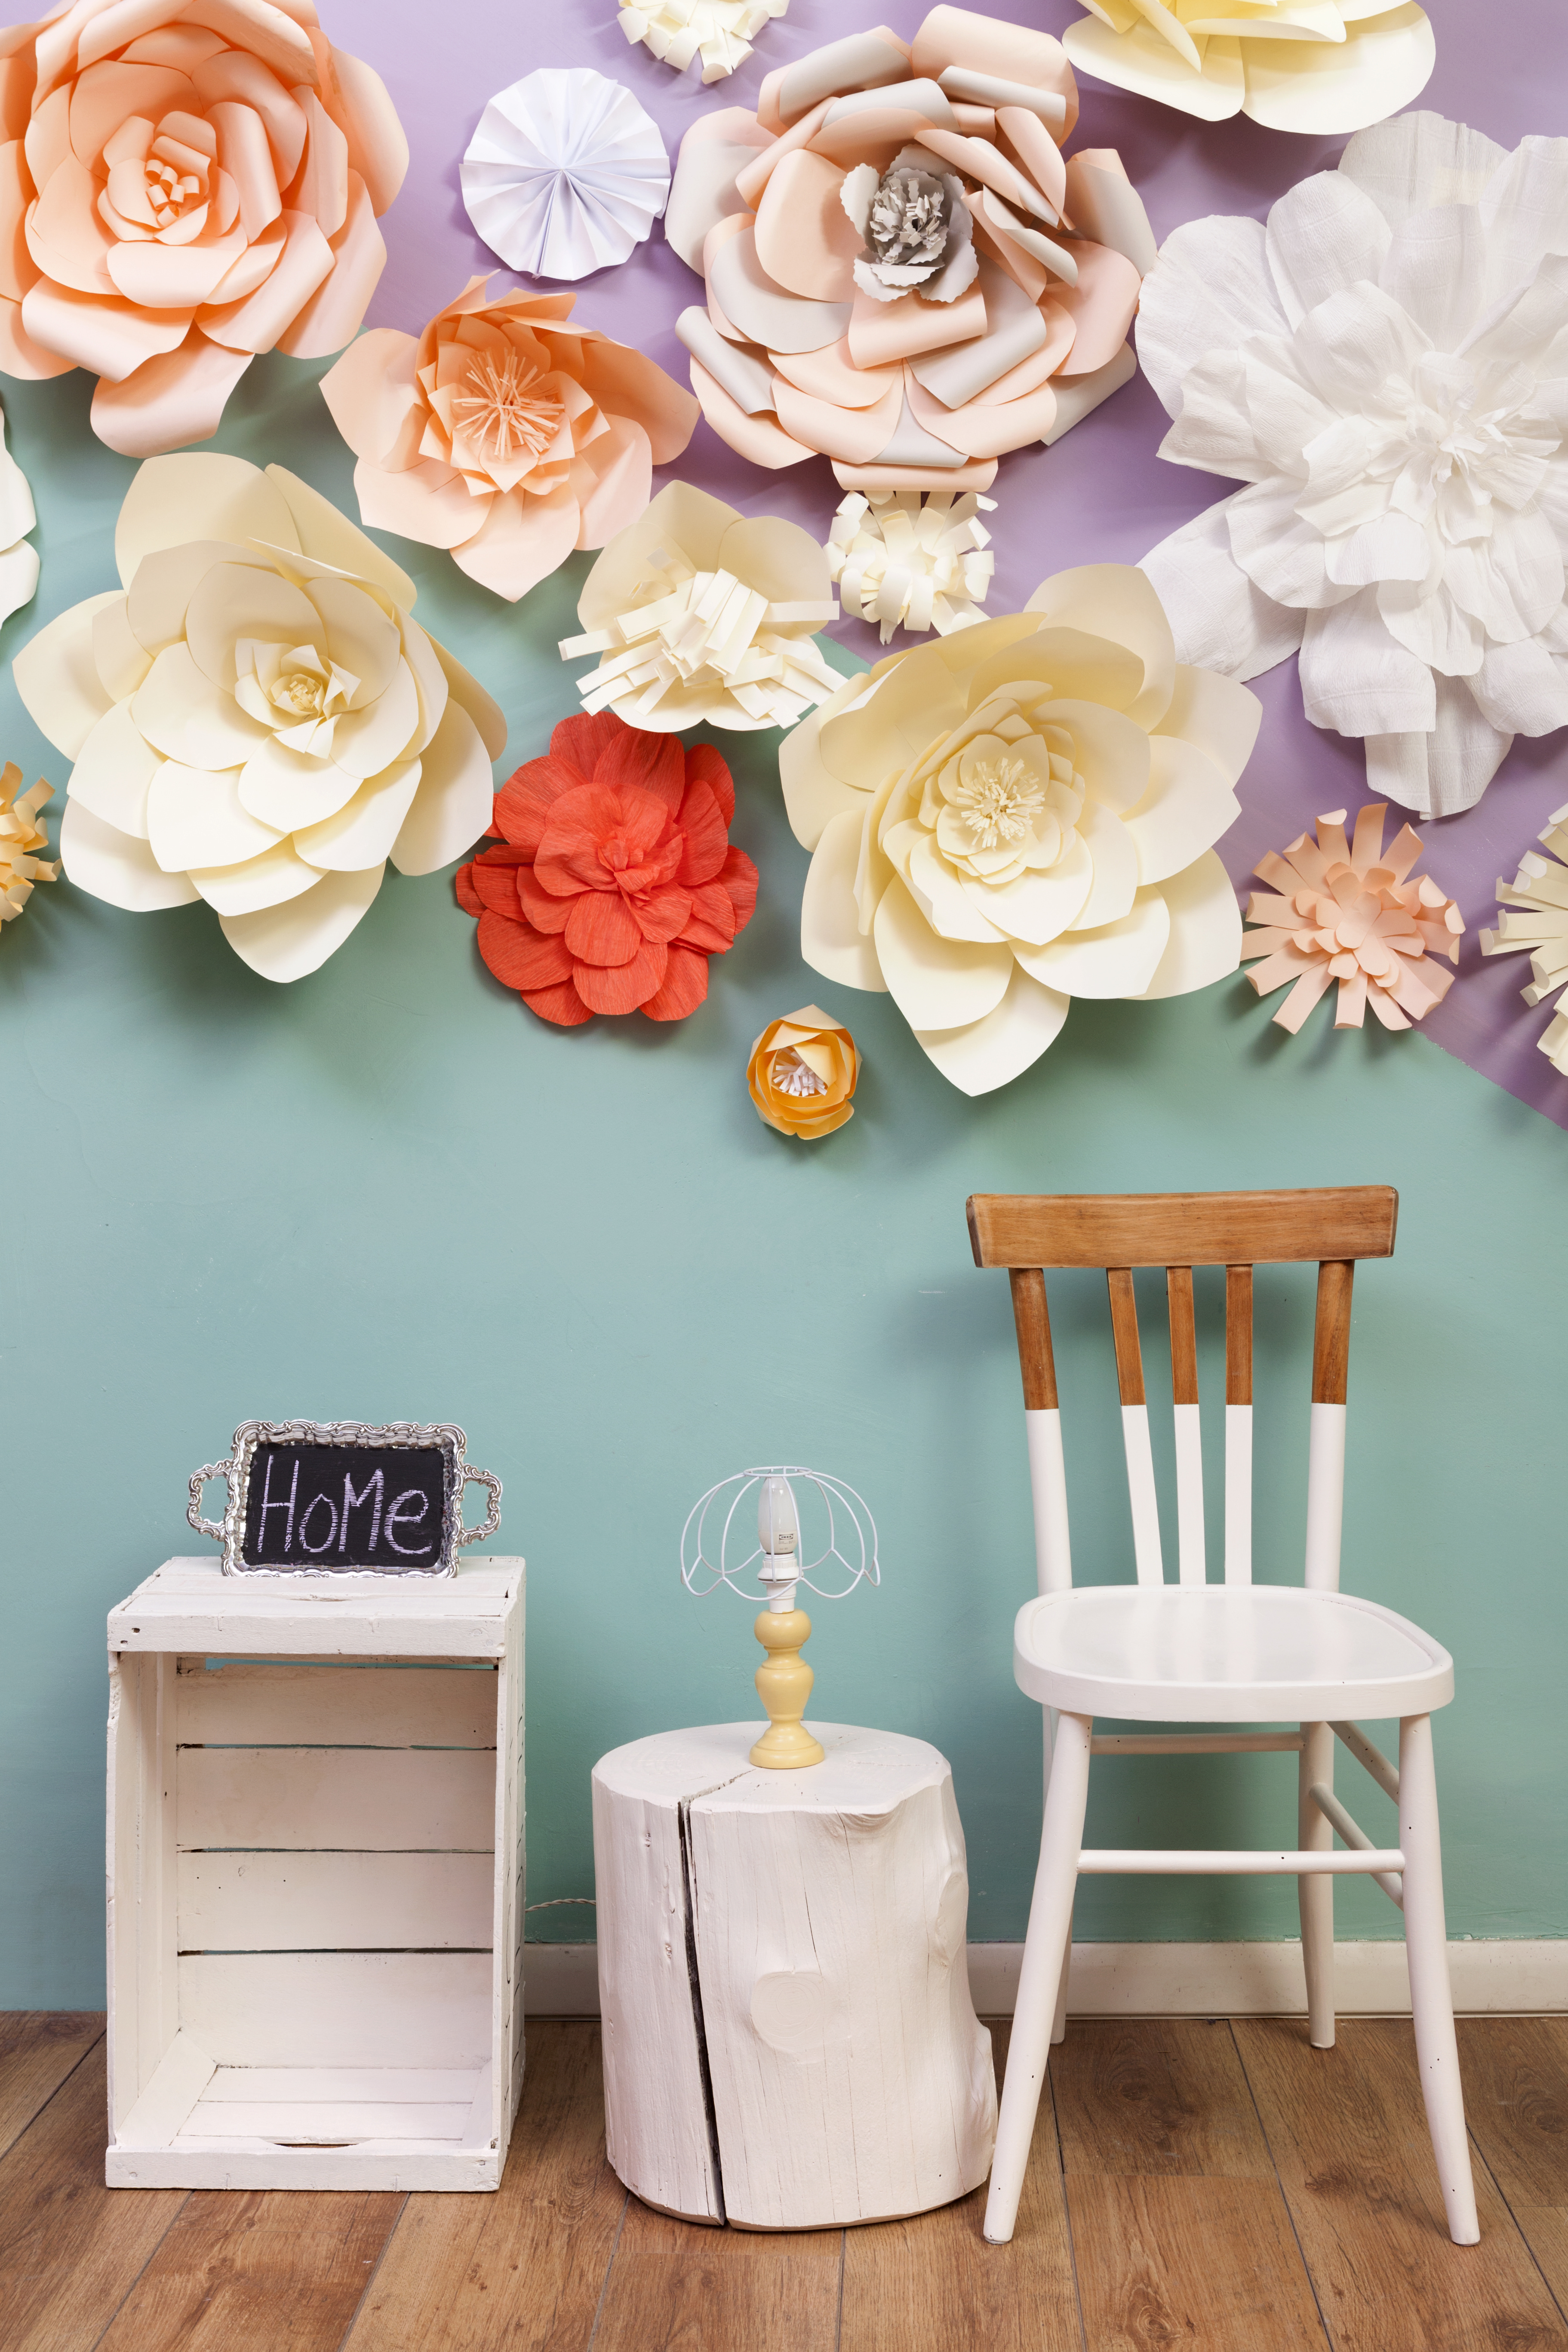 Peach, tan, orange, and white giant paper flowers hang on a green and purple wall, over a wooden chair and side table set up.